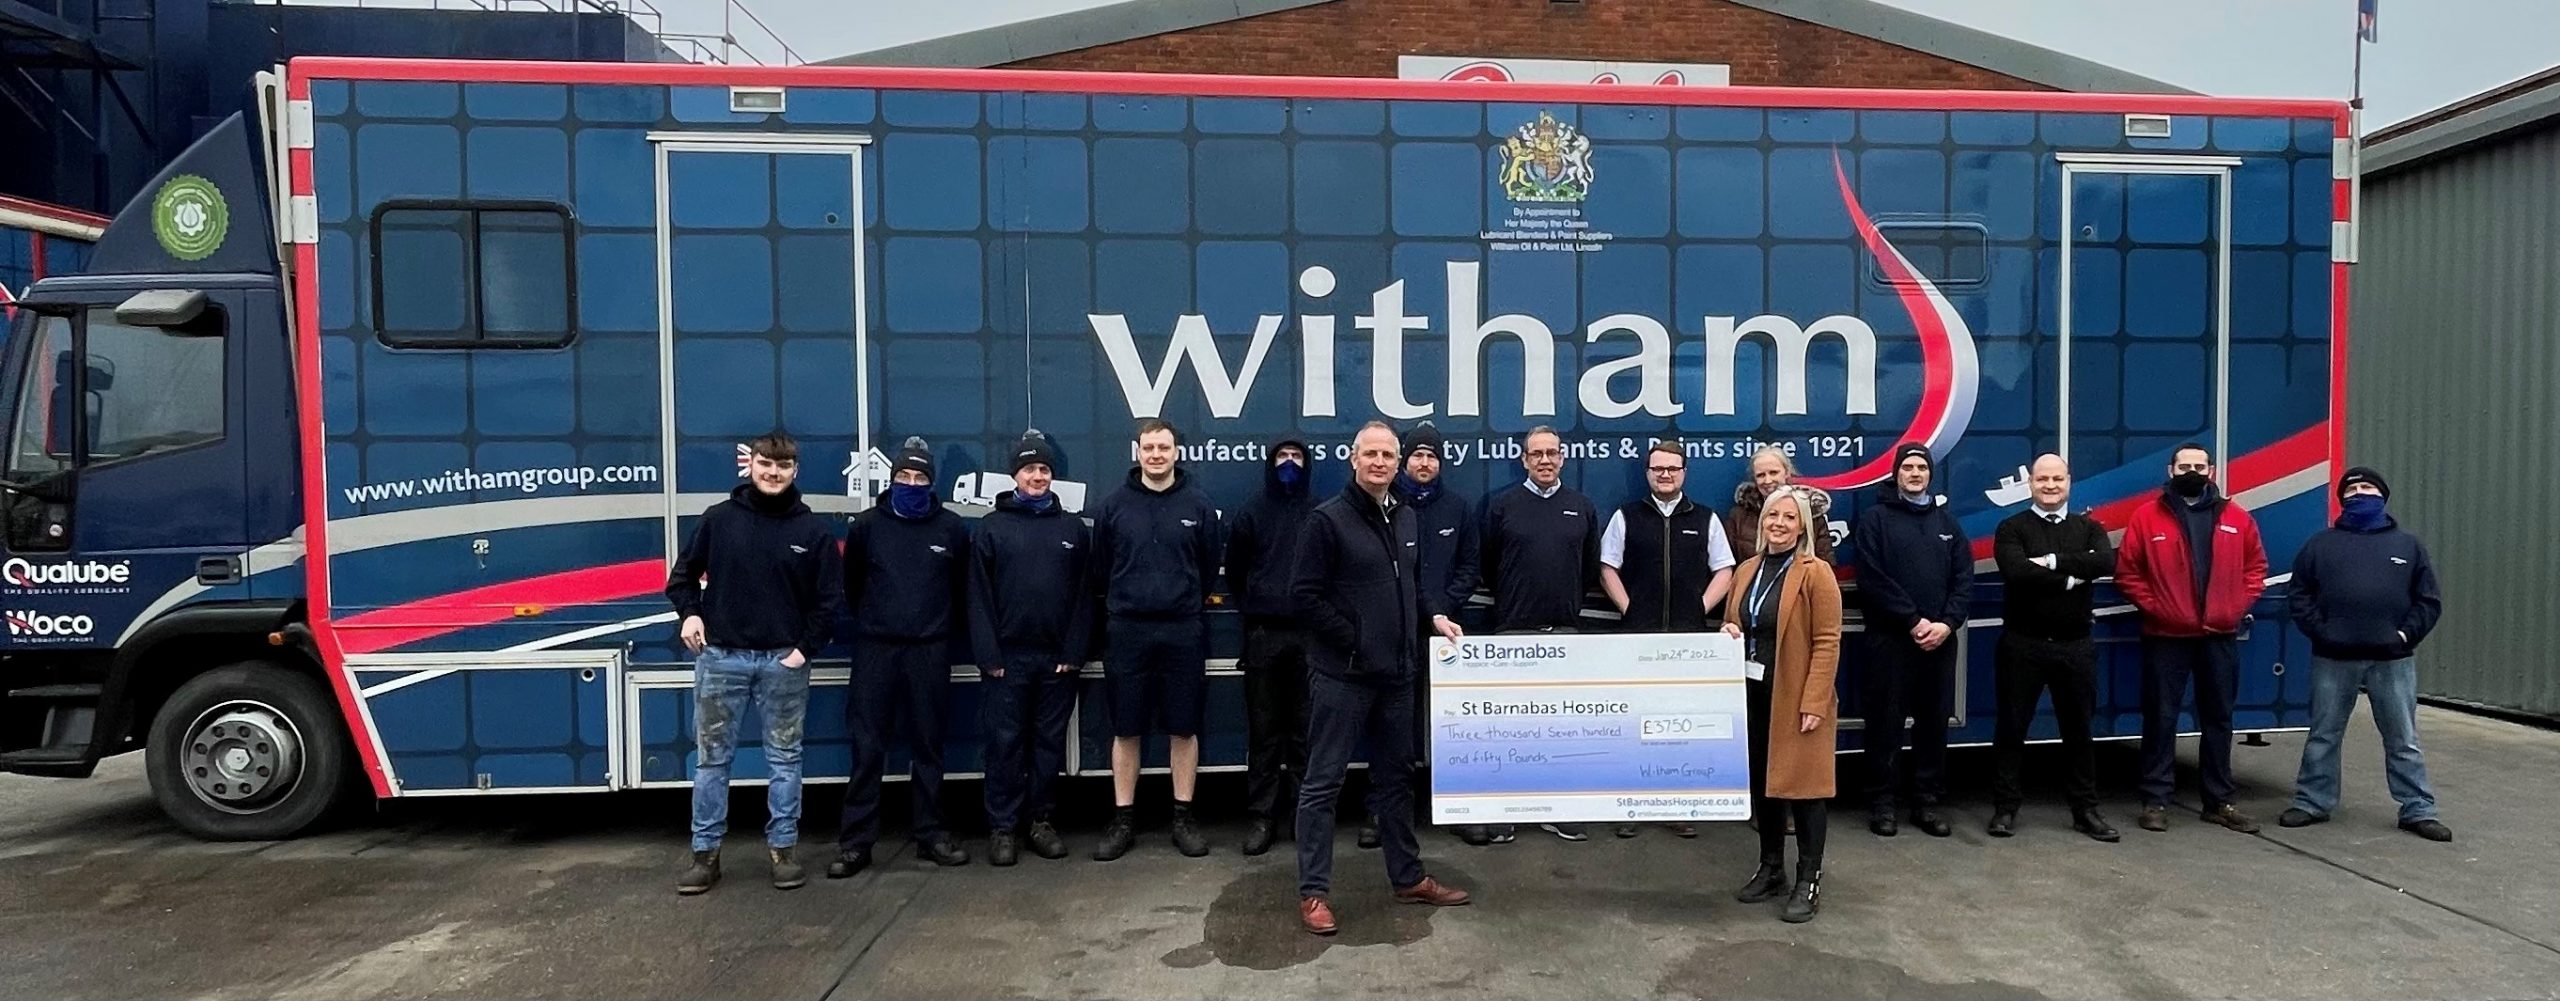 St Barnabas Charity Cheque Presentation with Witham Team